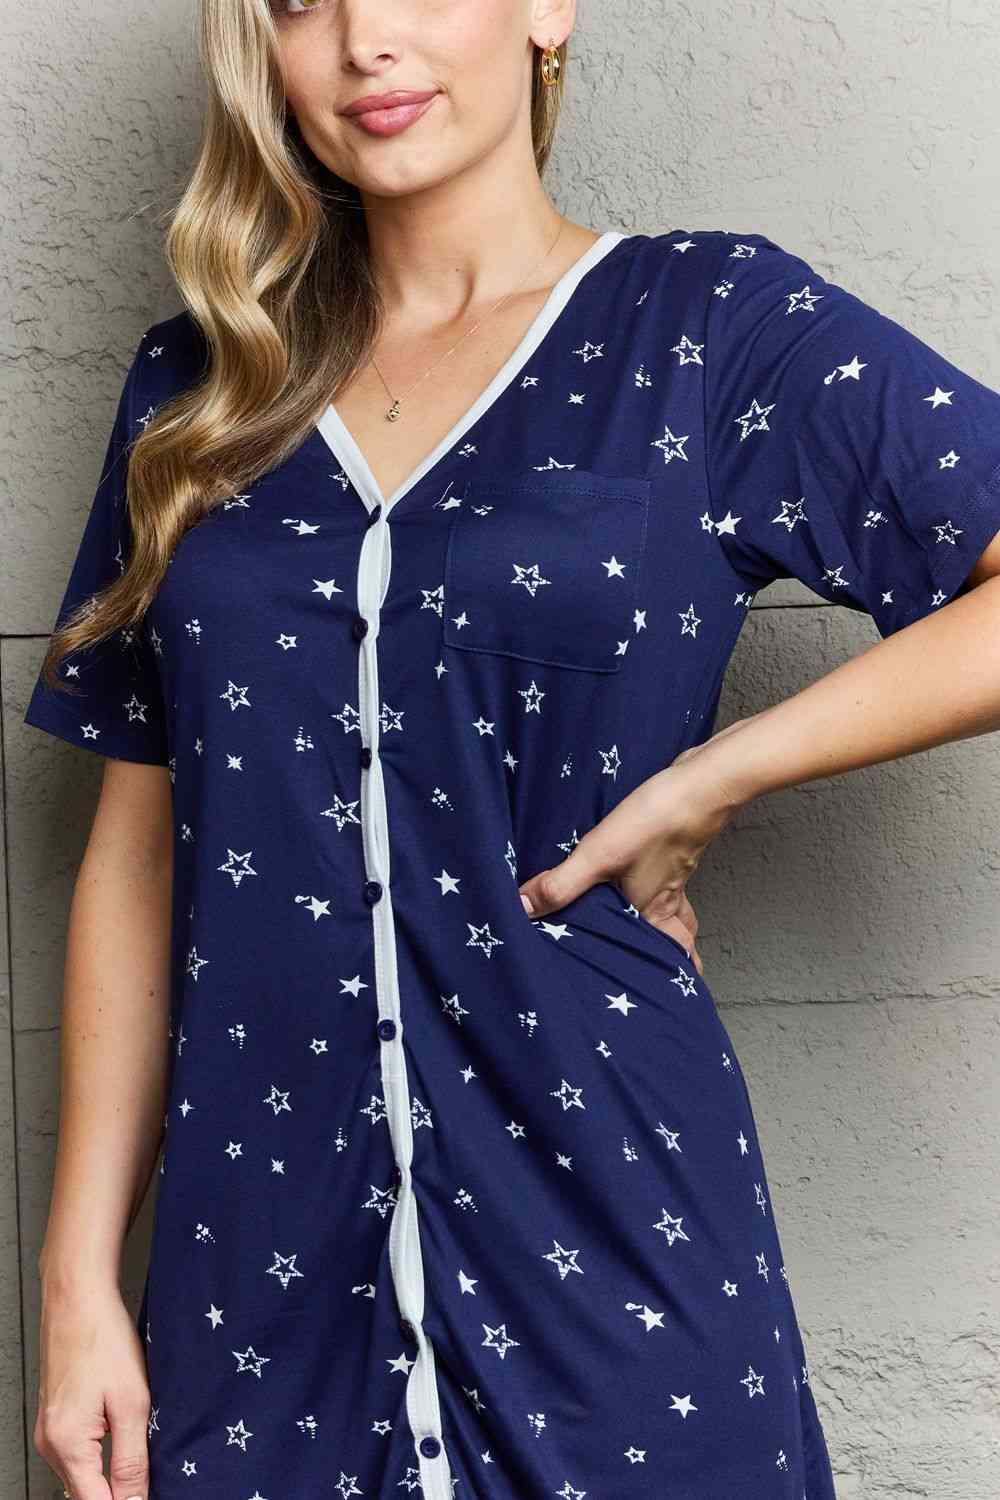 MOON NITE Quilted Quivers Sleepwear Dress